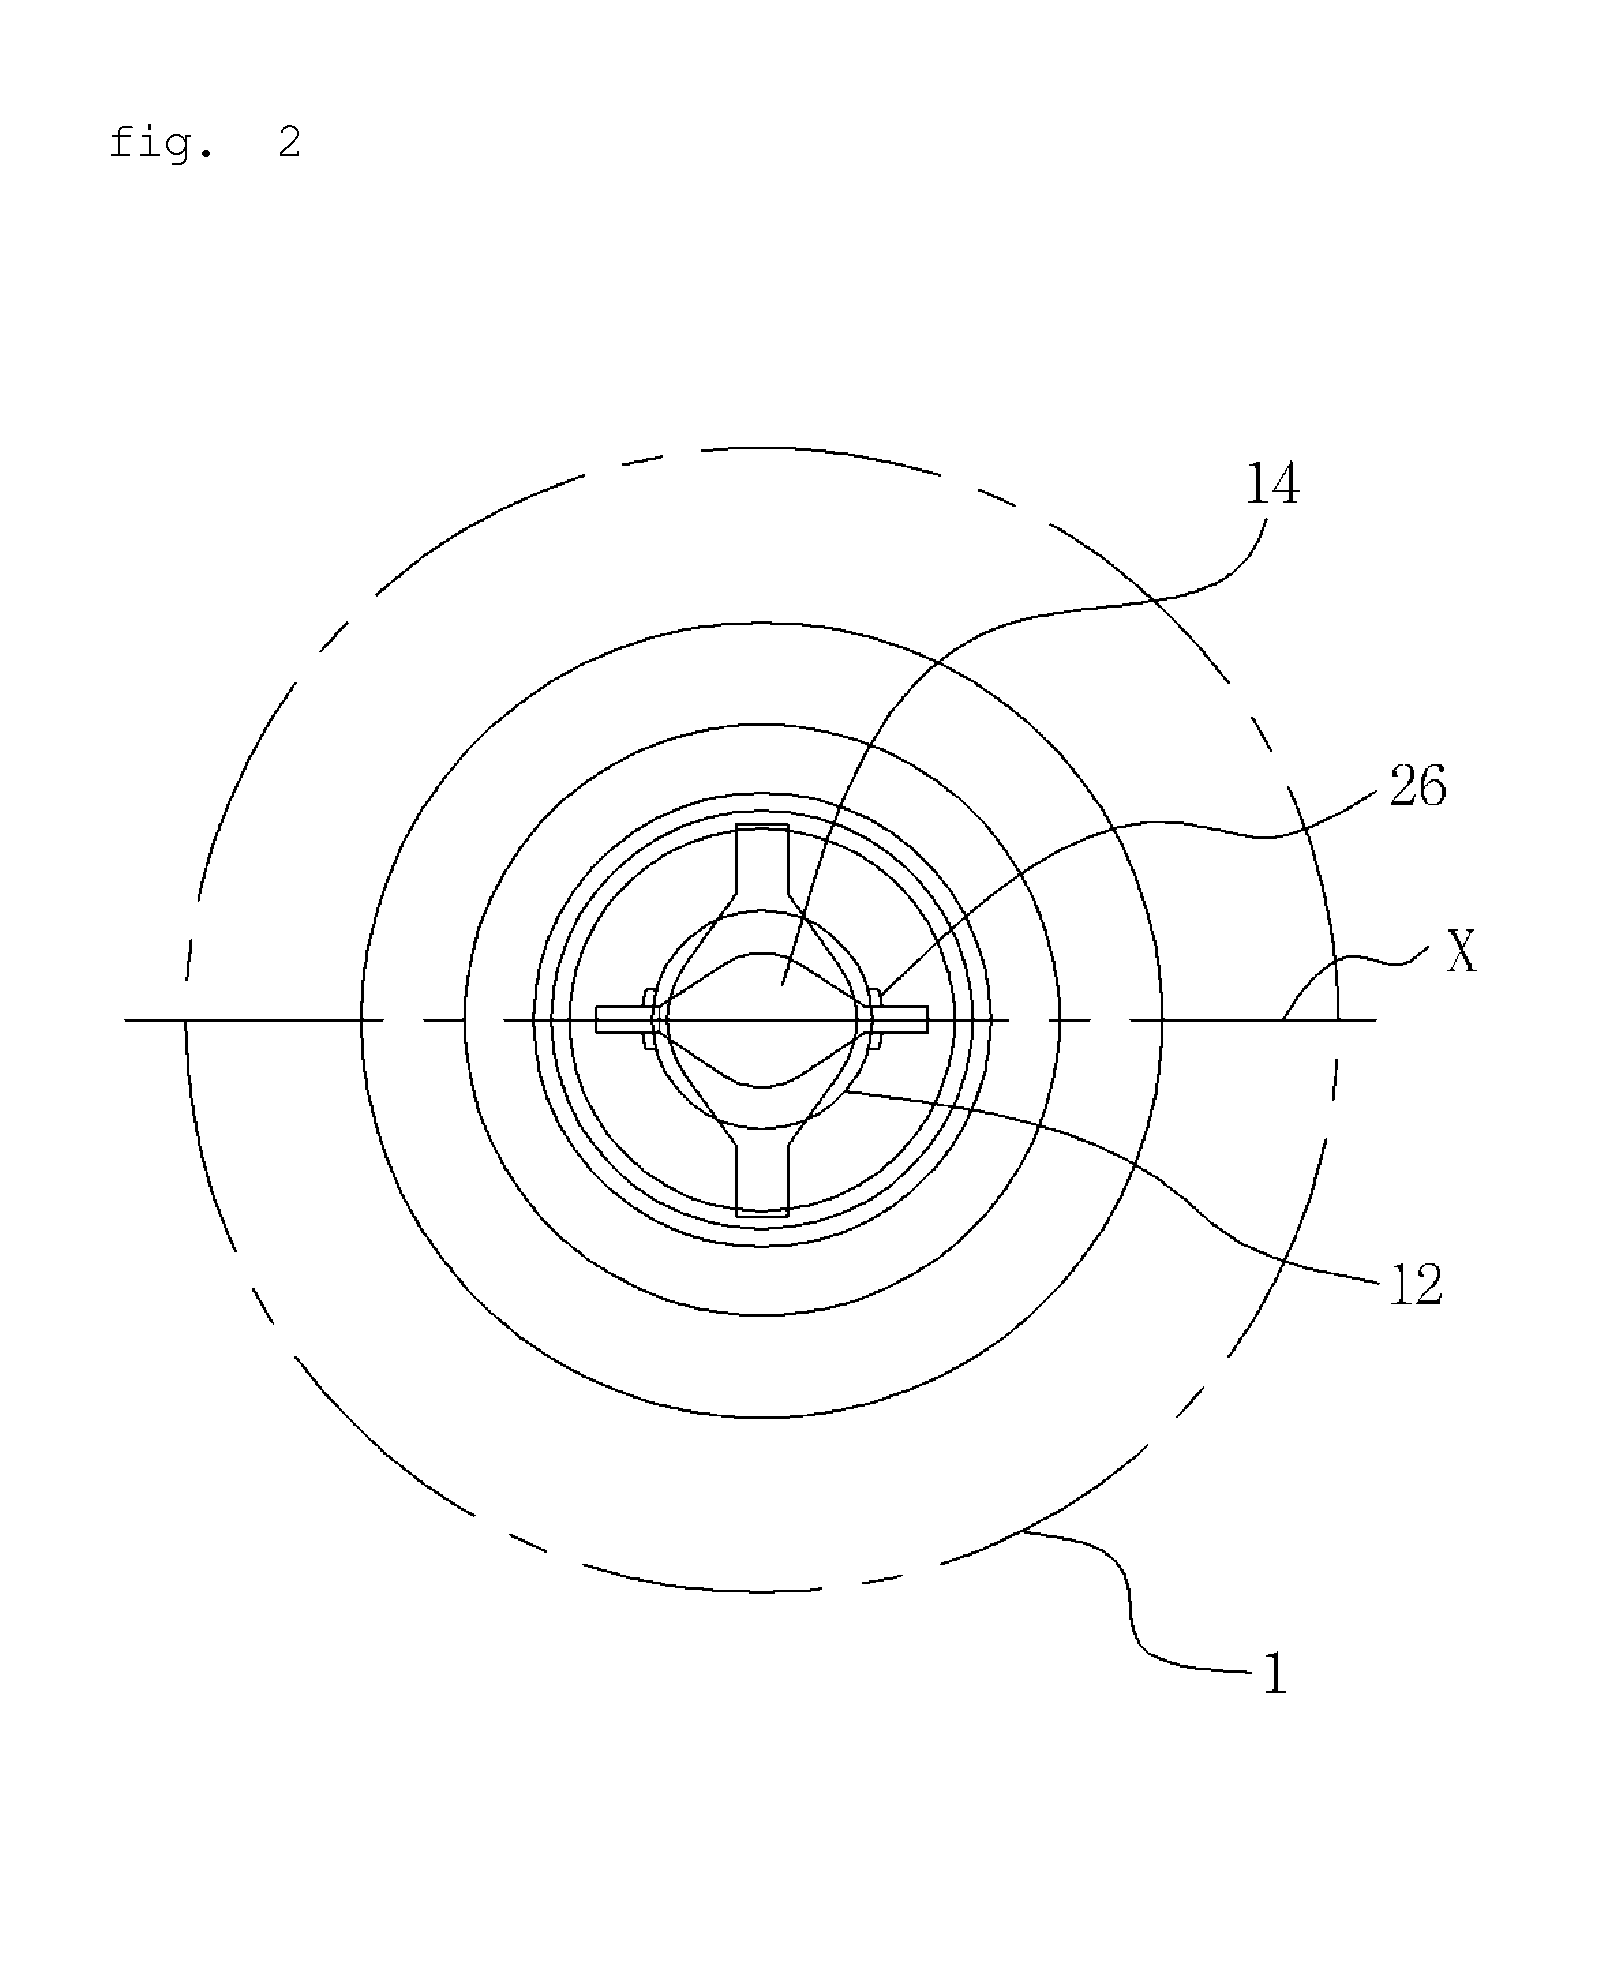 Portable electric candle having a lamp pendulating and rotating simulataneously